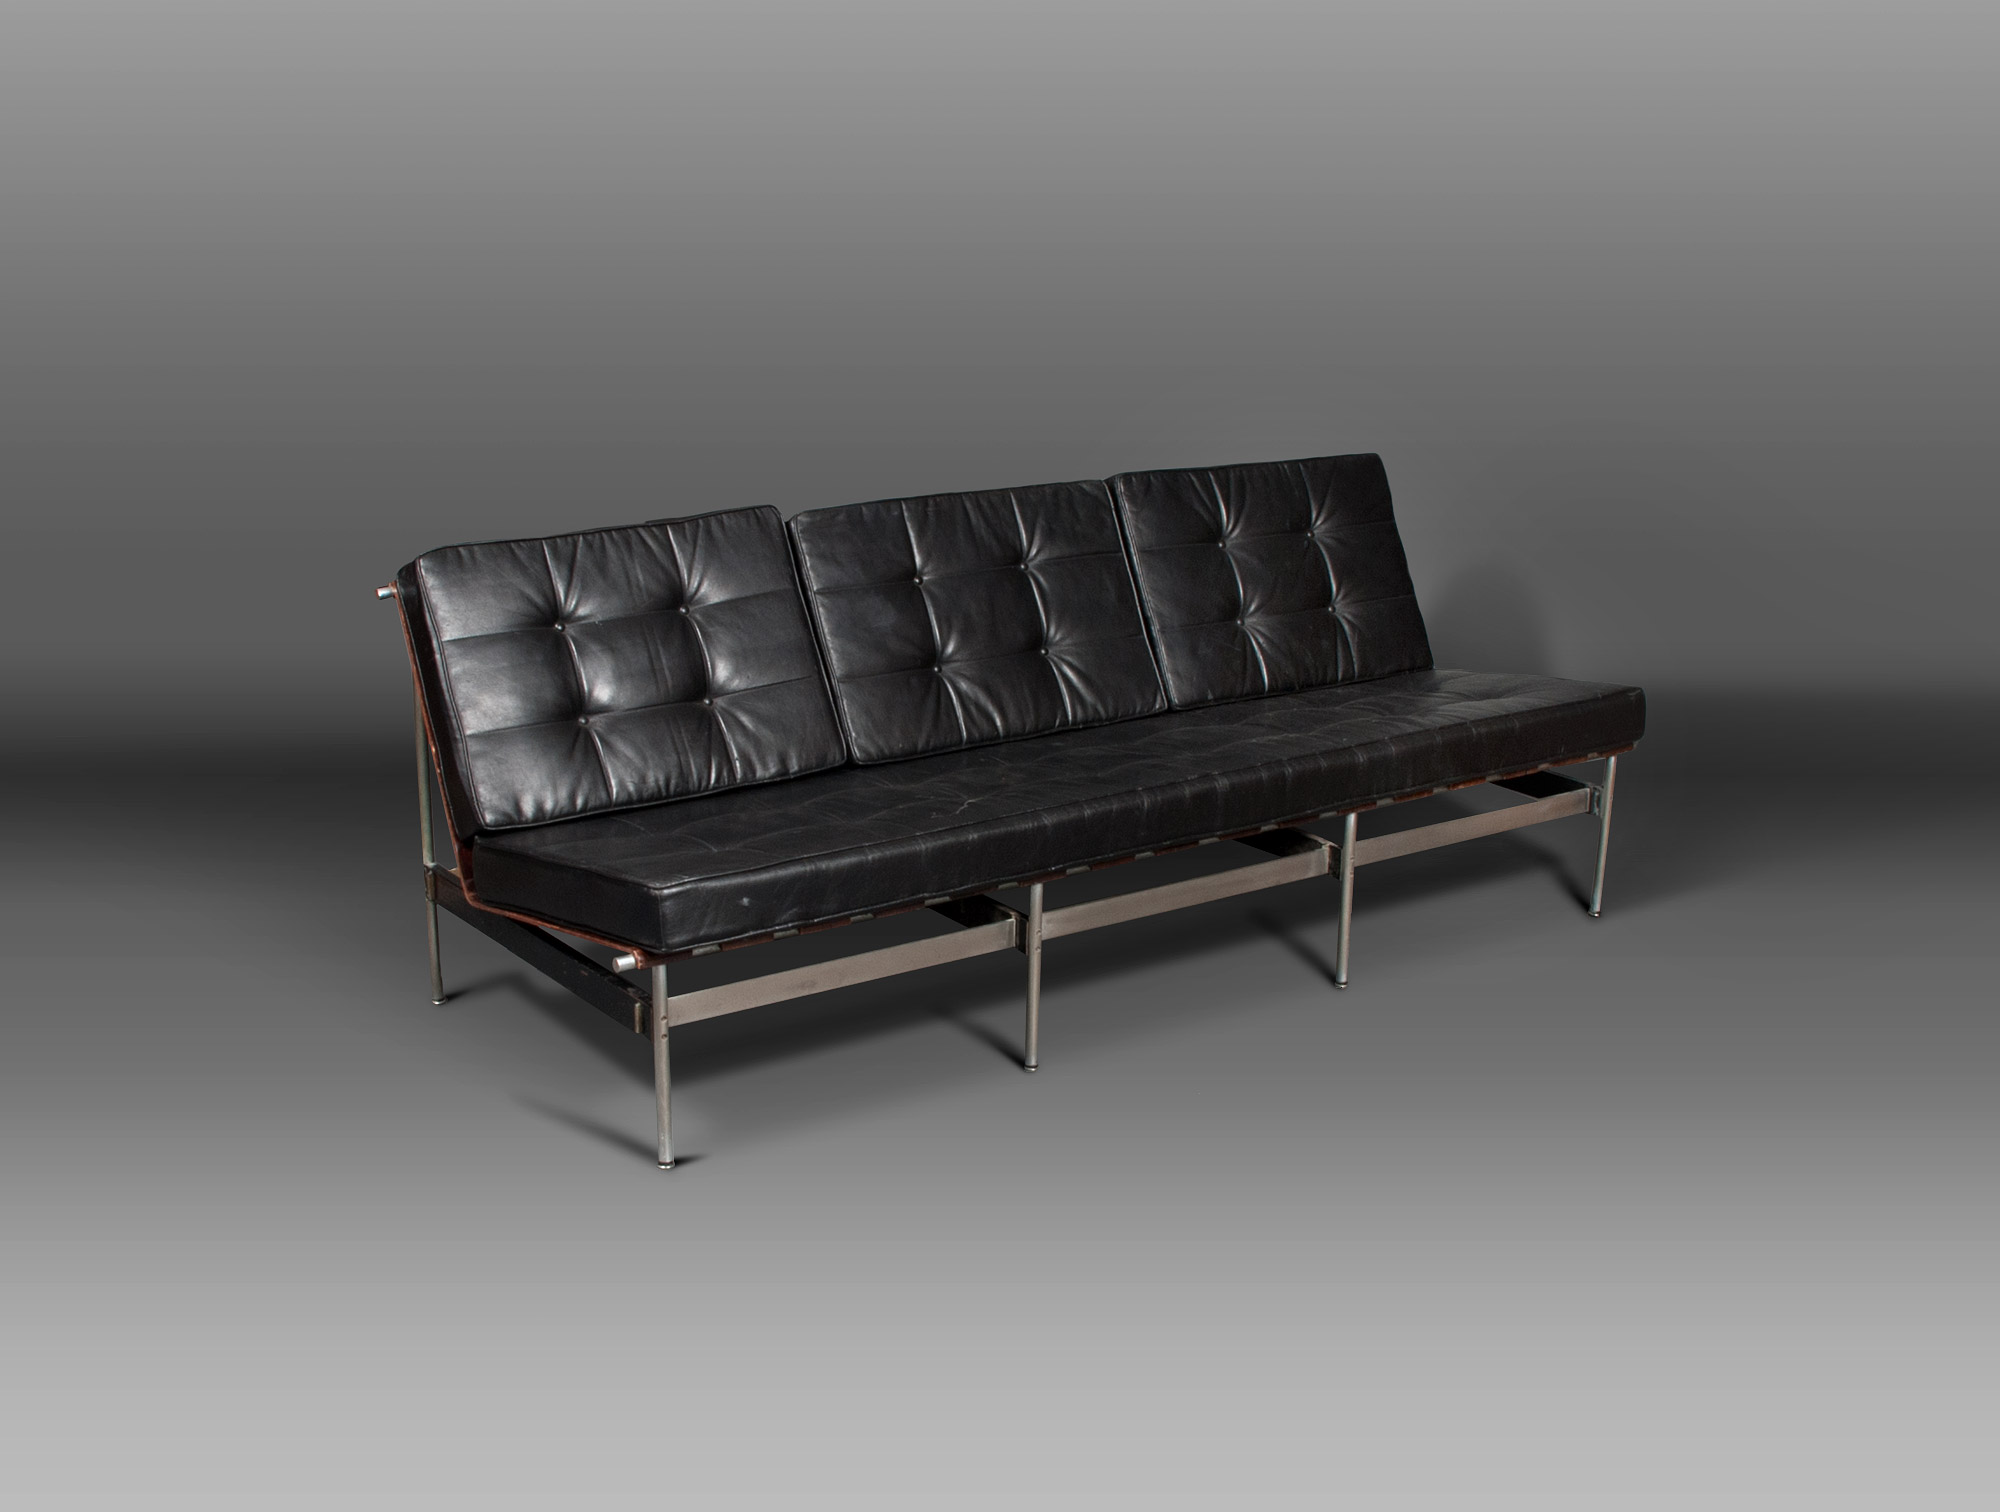 Black Leather On Bench Seat, Black Leather Bench Seat